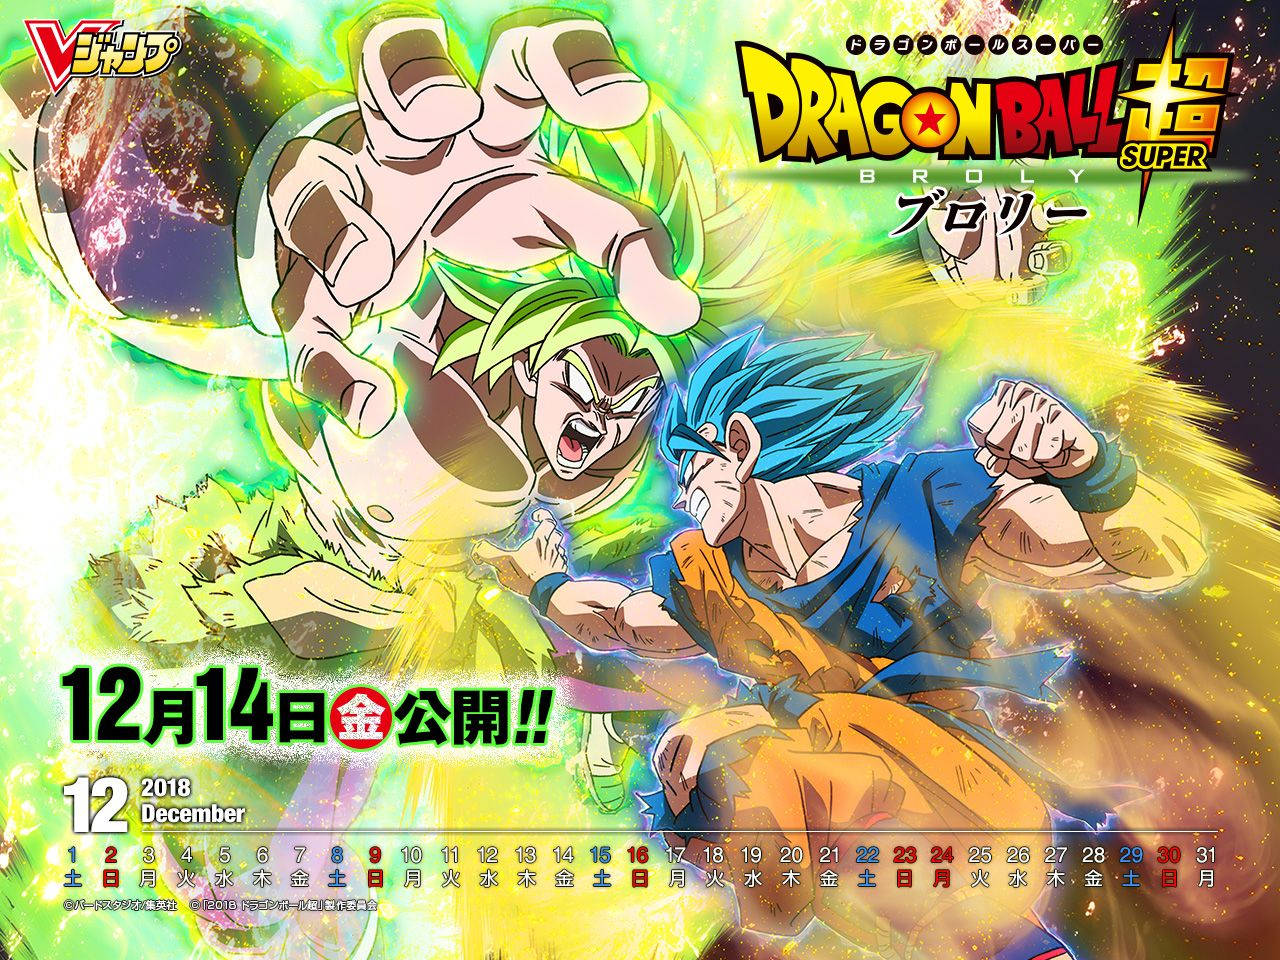 Goku And Vegeta Battle It Out In Dragon Ball Super Broly. Wallpaper